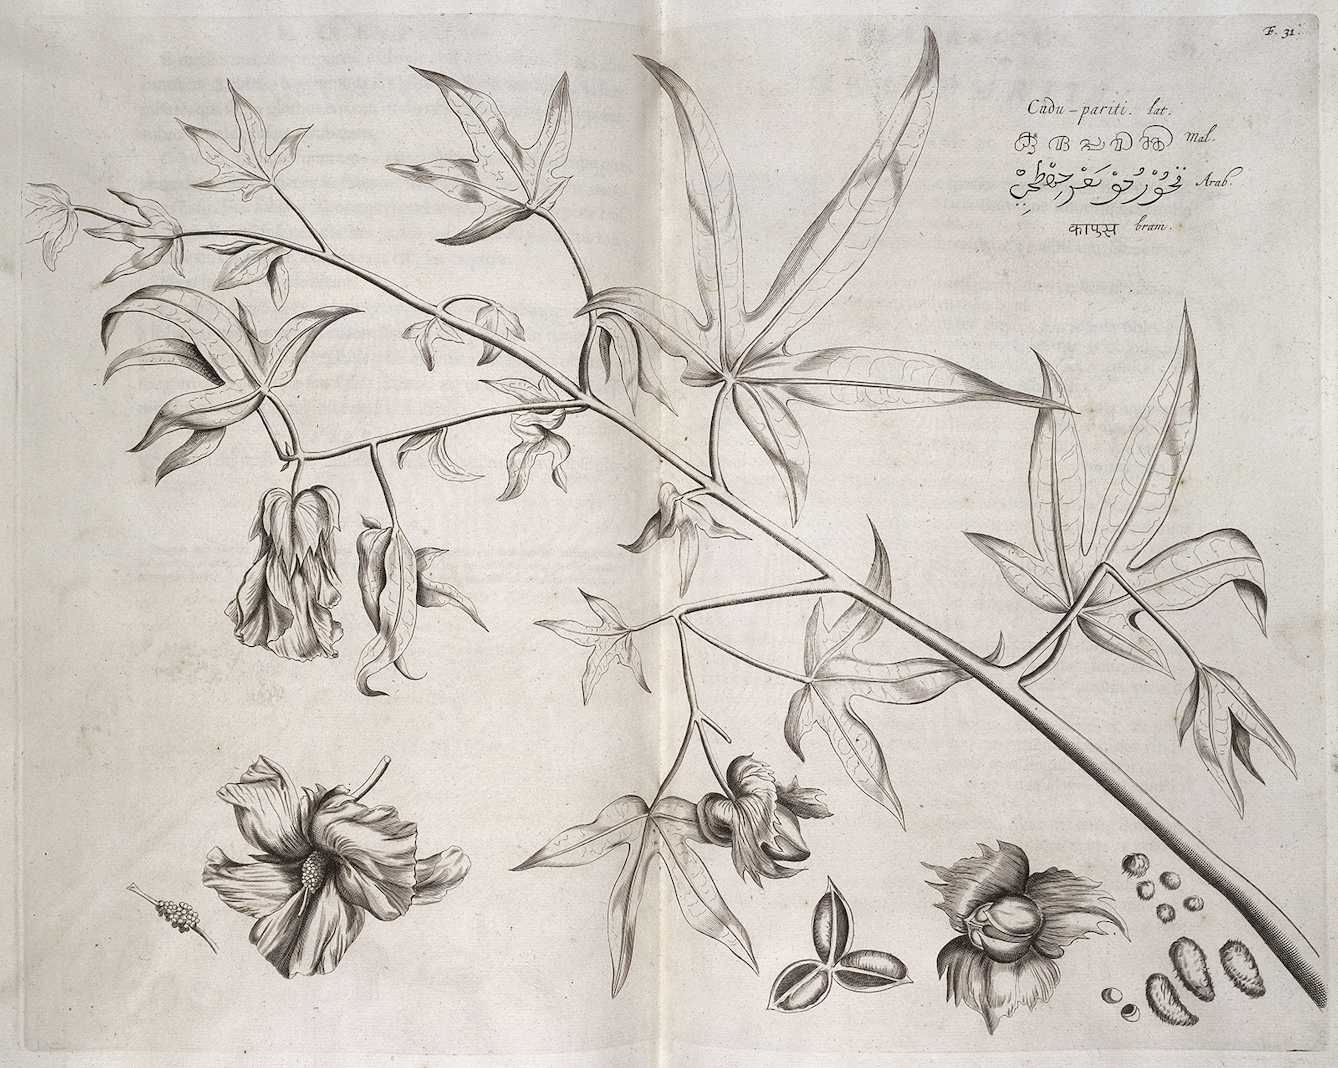 A black and white engraving of a branch with leaves, flowers, fruit and seeds.